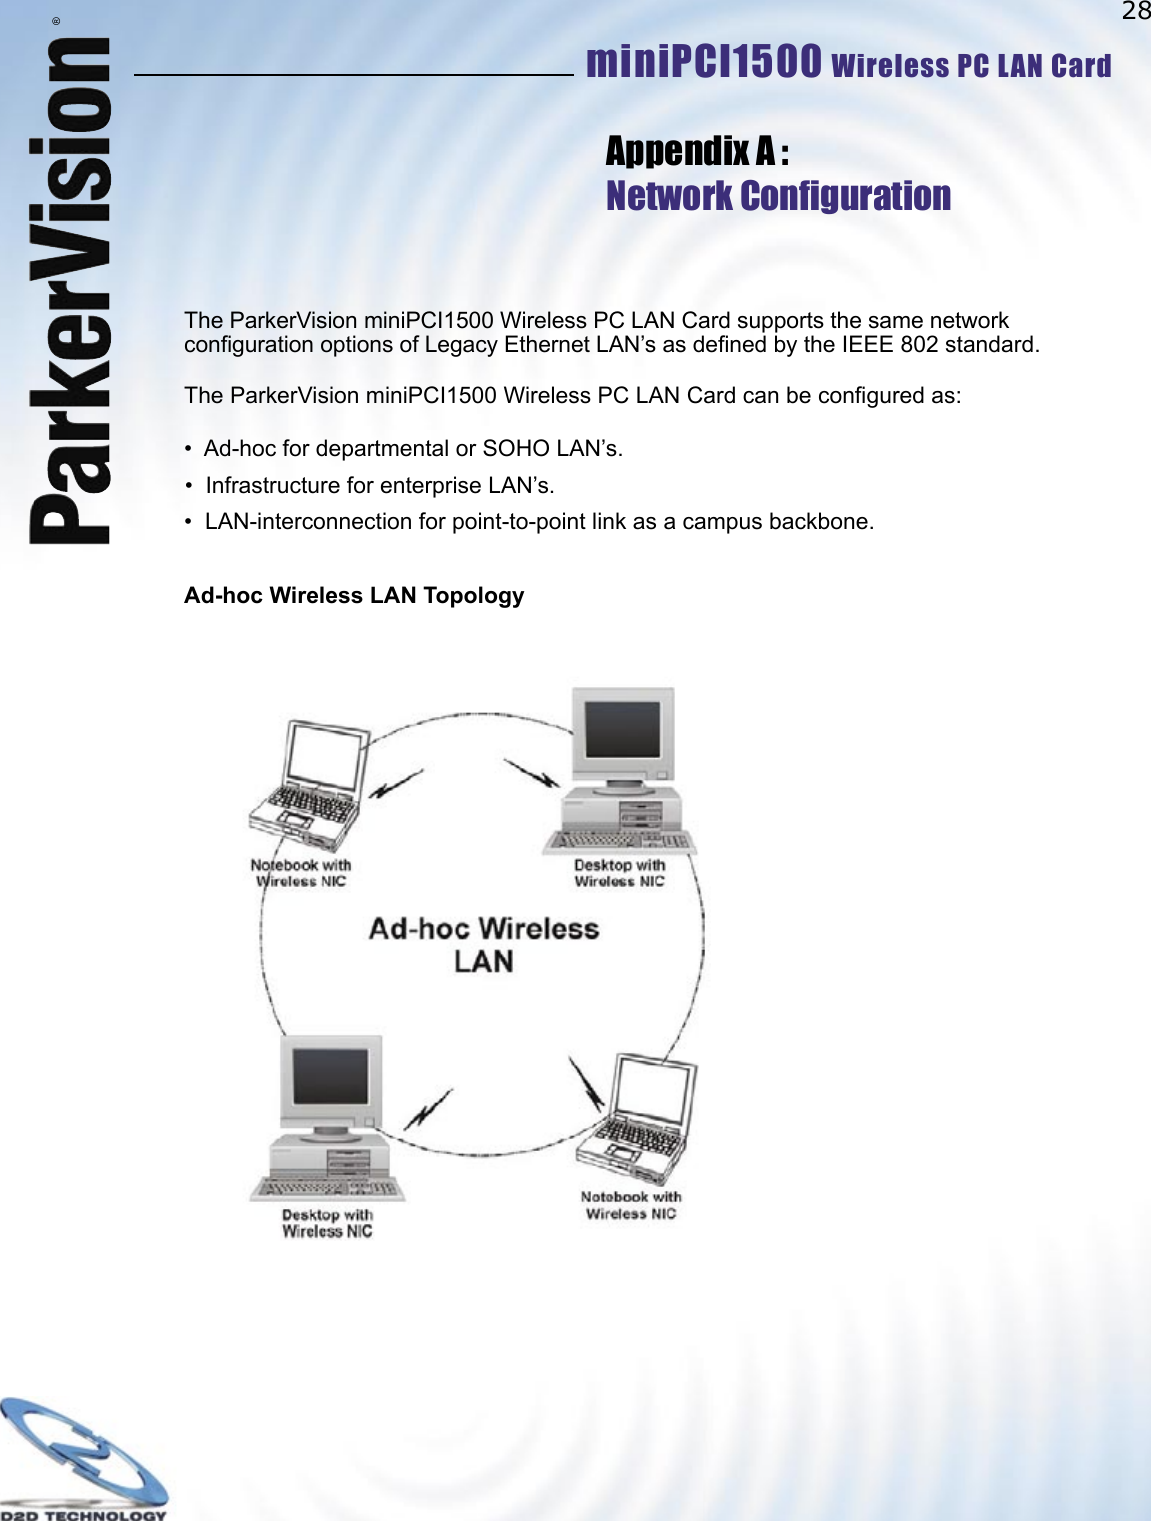 28miniPCI1500 Wireless PC LAN Card ®The ParkerVision miniPCI1500 Wireless PC LAN Card supports the same network conﬁ guration options of Legacy Ethernet LAN’s as deﬁ ned by the IEEE 802 standard. The ParkerVision miniPCI1500 Wireless PC LAN Card can be conﬁ gured as:•  Ad-hoc for departmental or SOHO LAN’s.•  Infrastructure for enterprise LAN’s.•  LAN-interconnection for point-to-point link as a campus backbone.Ad-hoc Wireless LAN TopologyAppendix A :Network Conﬁ guration